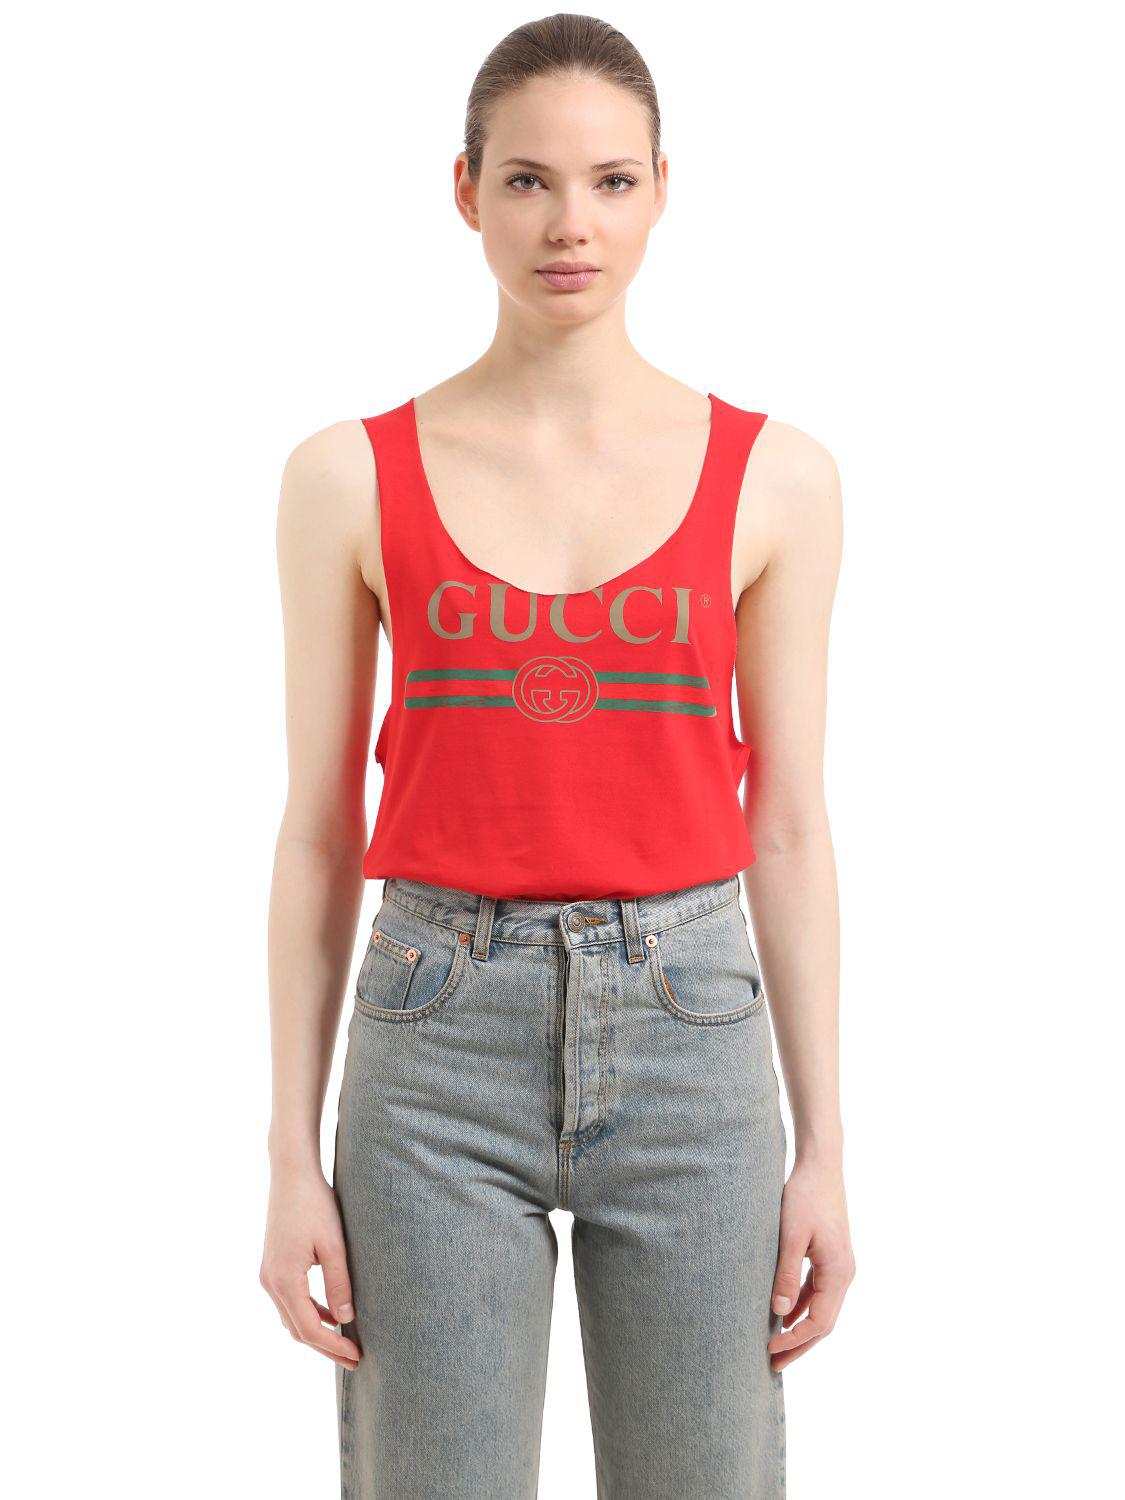 Gucci Logo Printed Cotton Jersey Tank Top in Red - Lyst